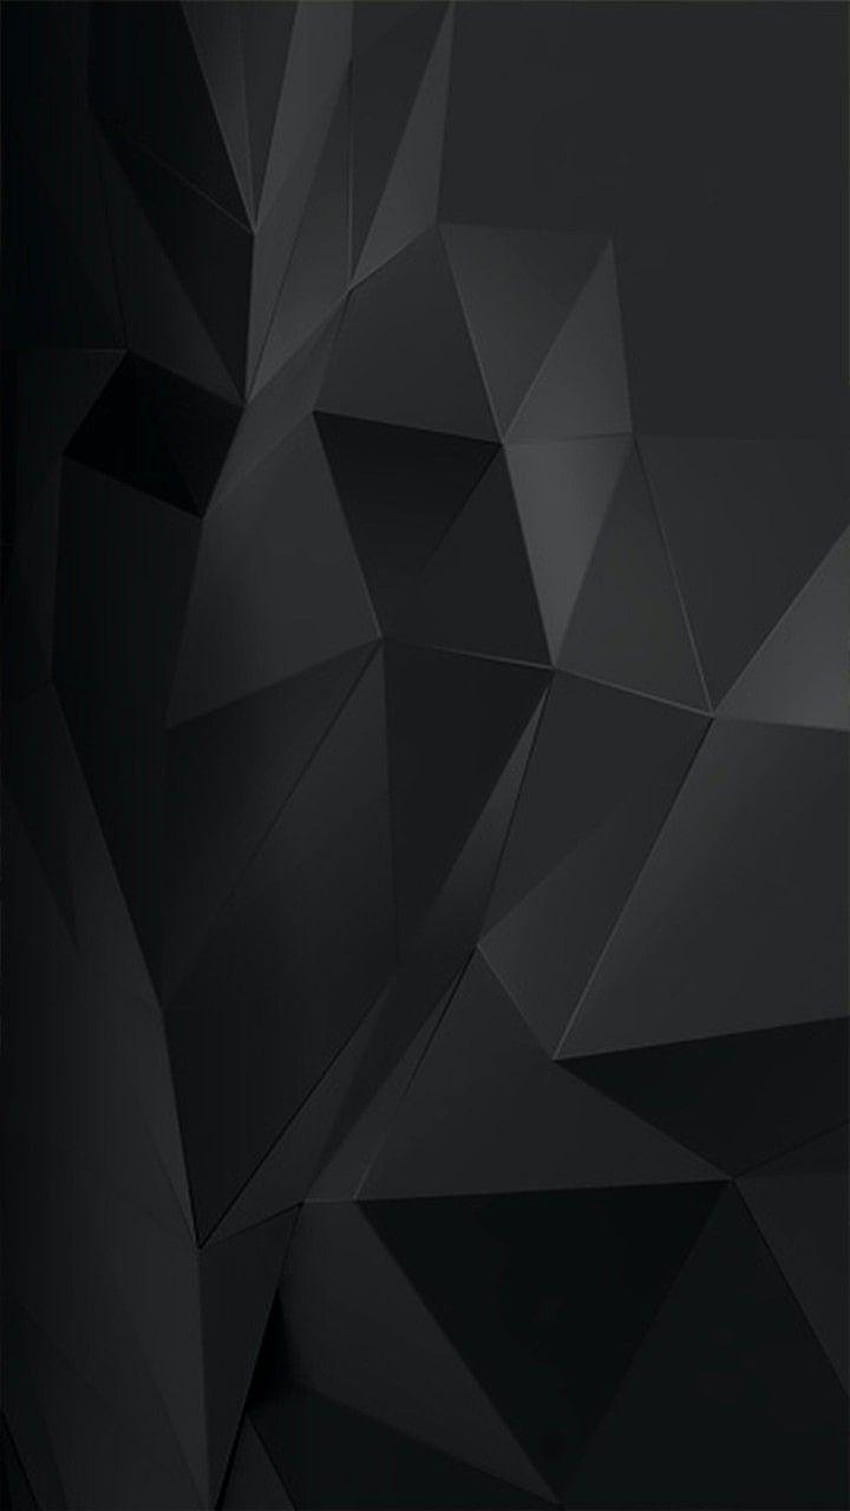 Black grey white color abstract design Lshaped layer of lines square  shapes texture background home décor wallpaper